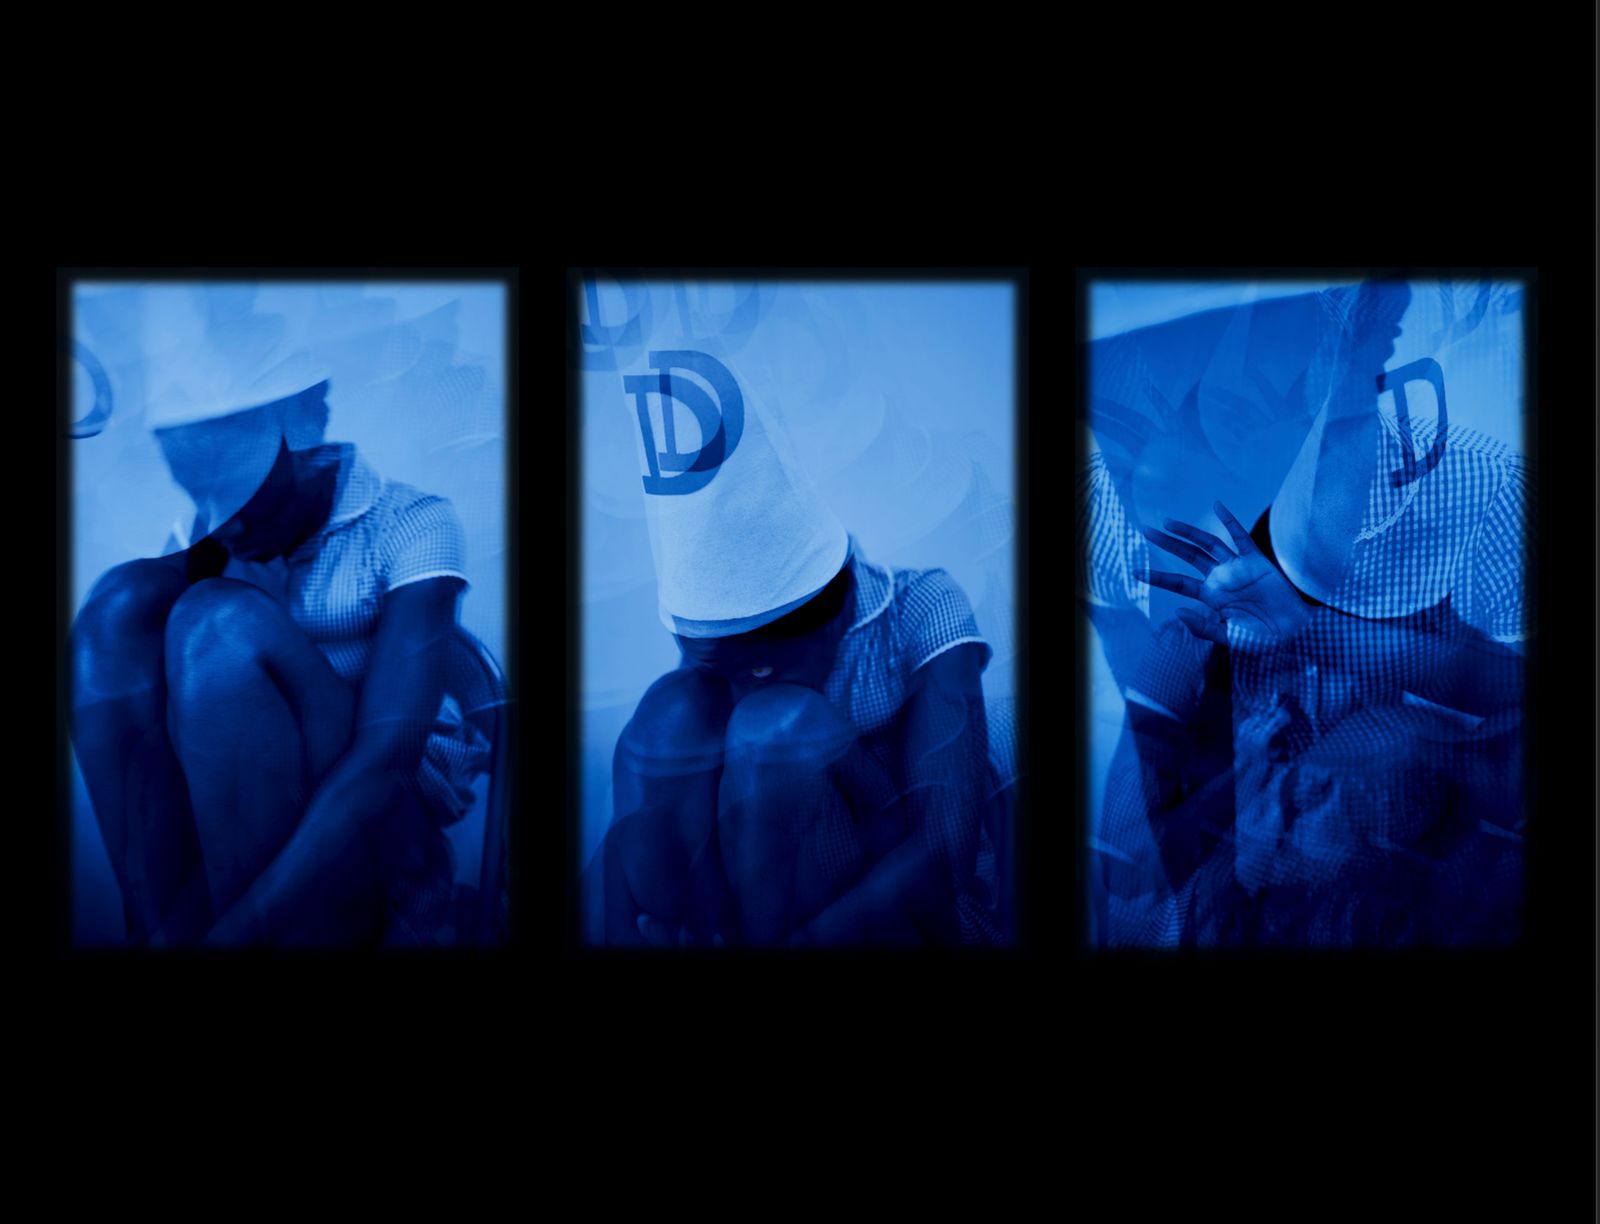 © Heather Agyepong - D is for...(Triptych) ego death, Commissioned by Jerwood Arts & Photoworks, 2022